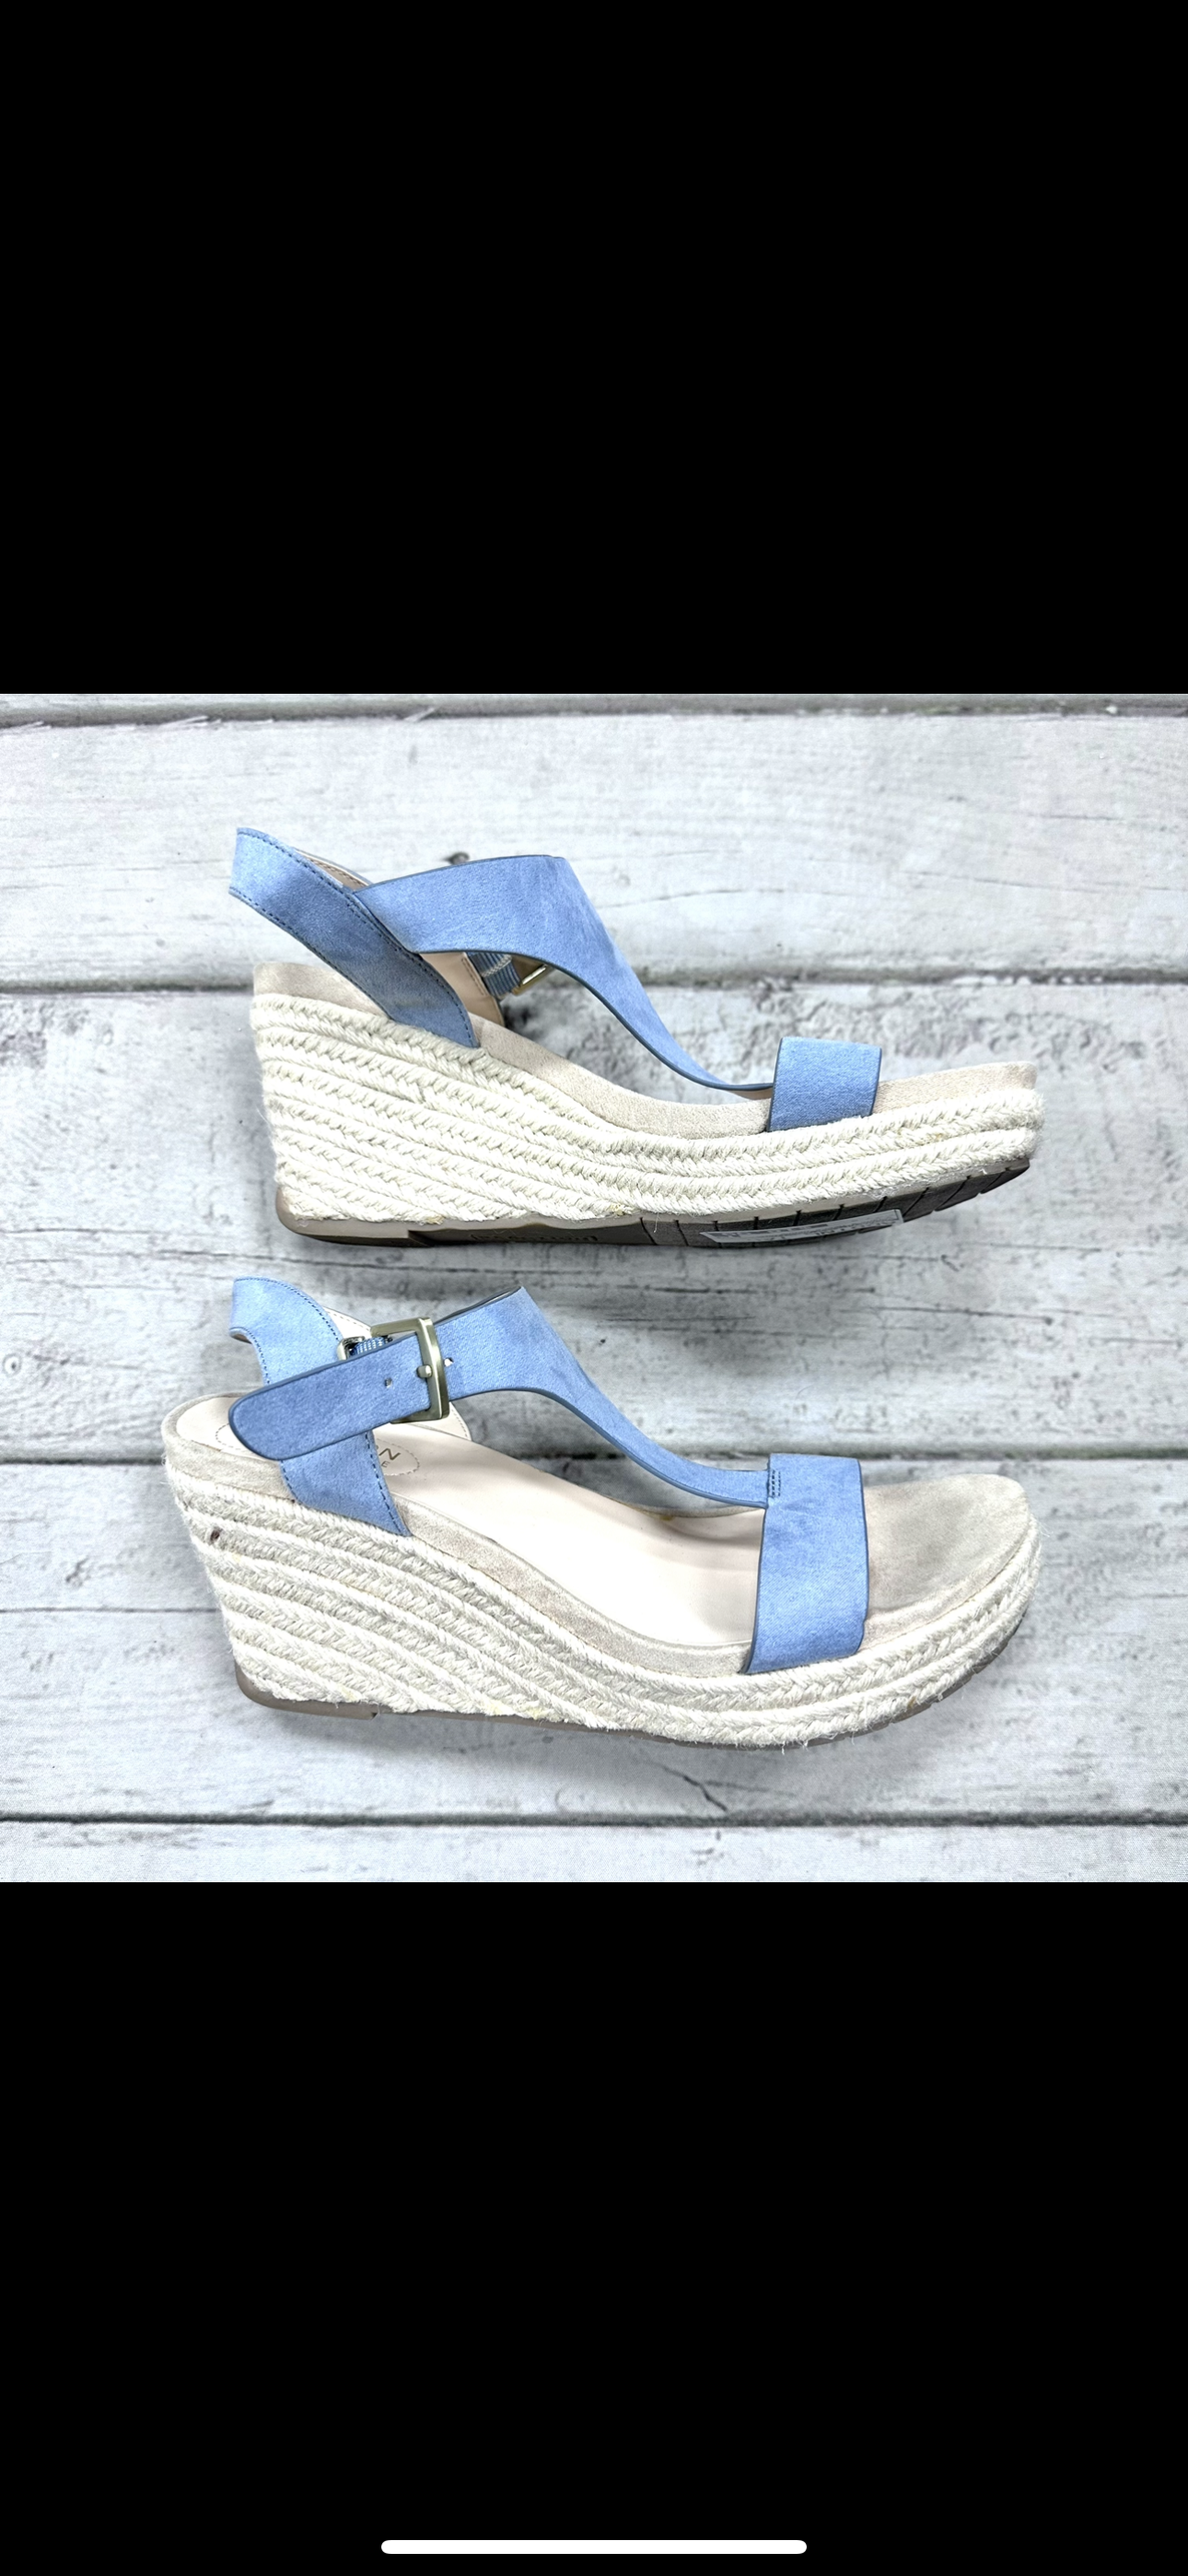 Sandals Heels Wedge By Kenneth Cole Reaction  Size: 7.5